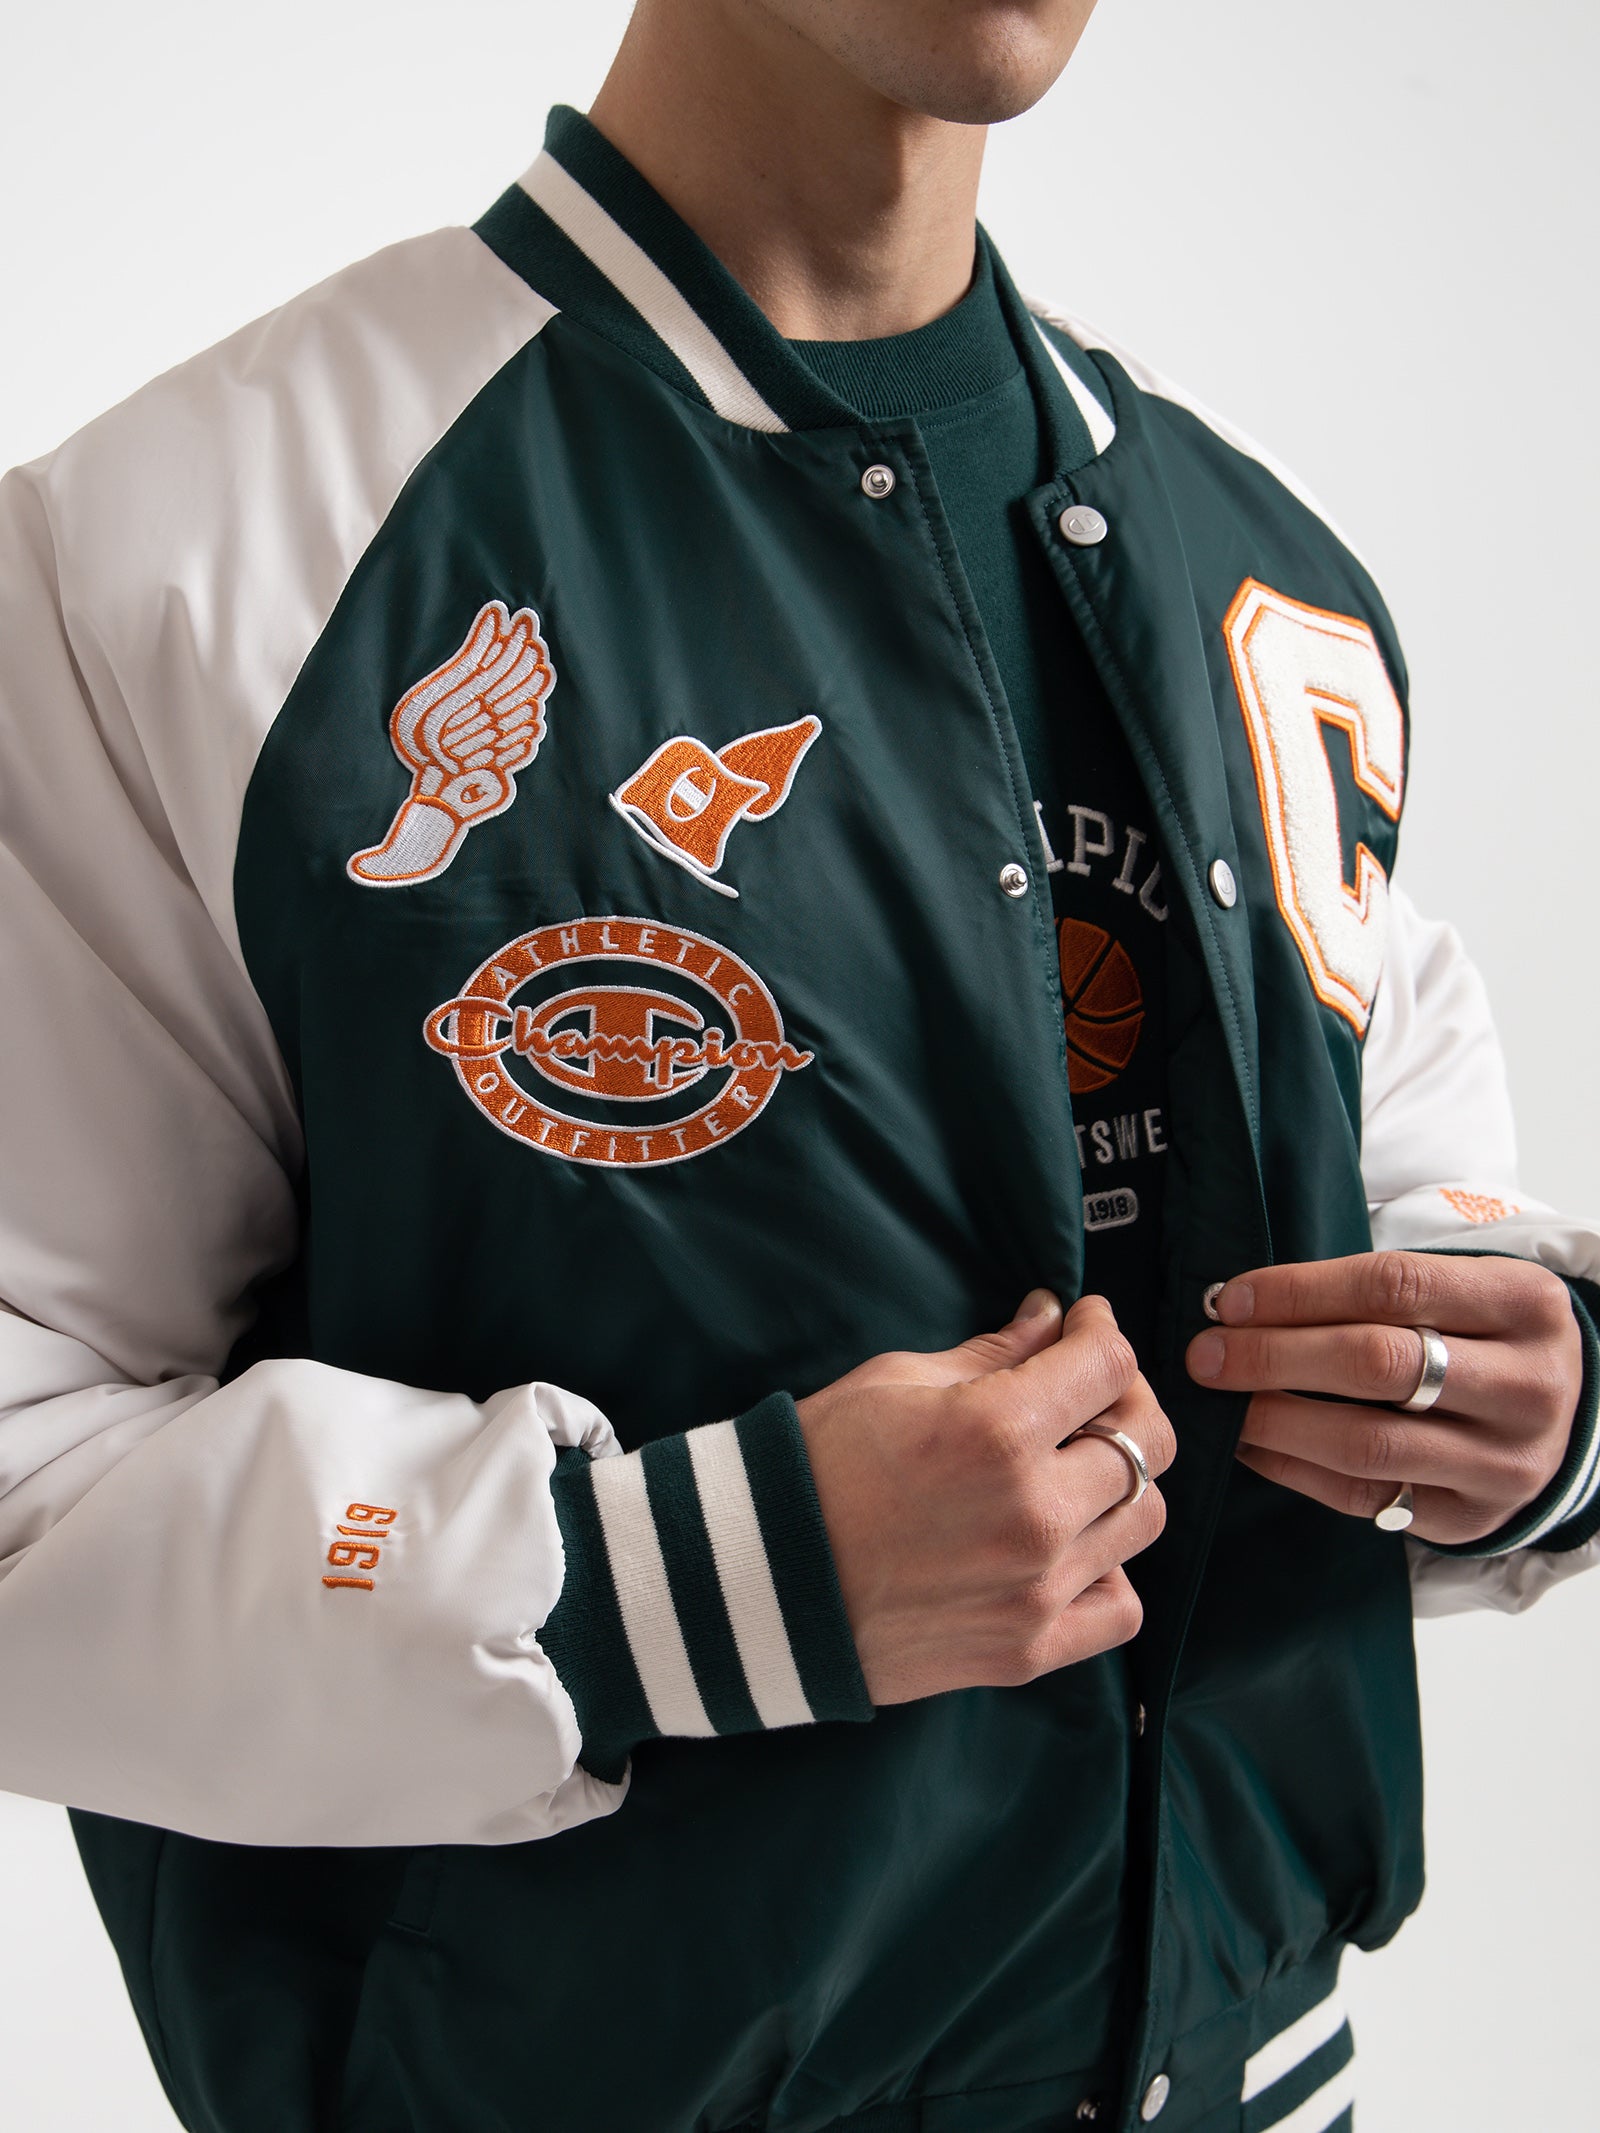 Re:Bound Clubhouse Varsity Jacket in Midfield Green